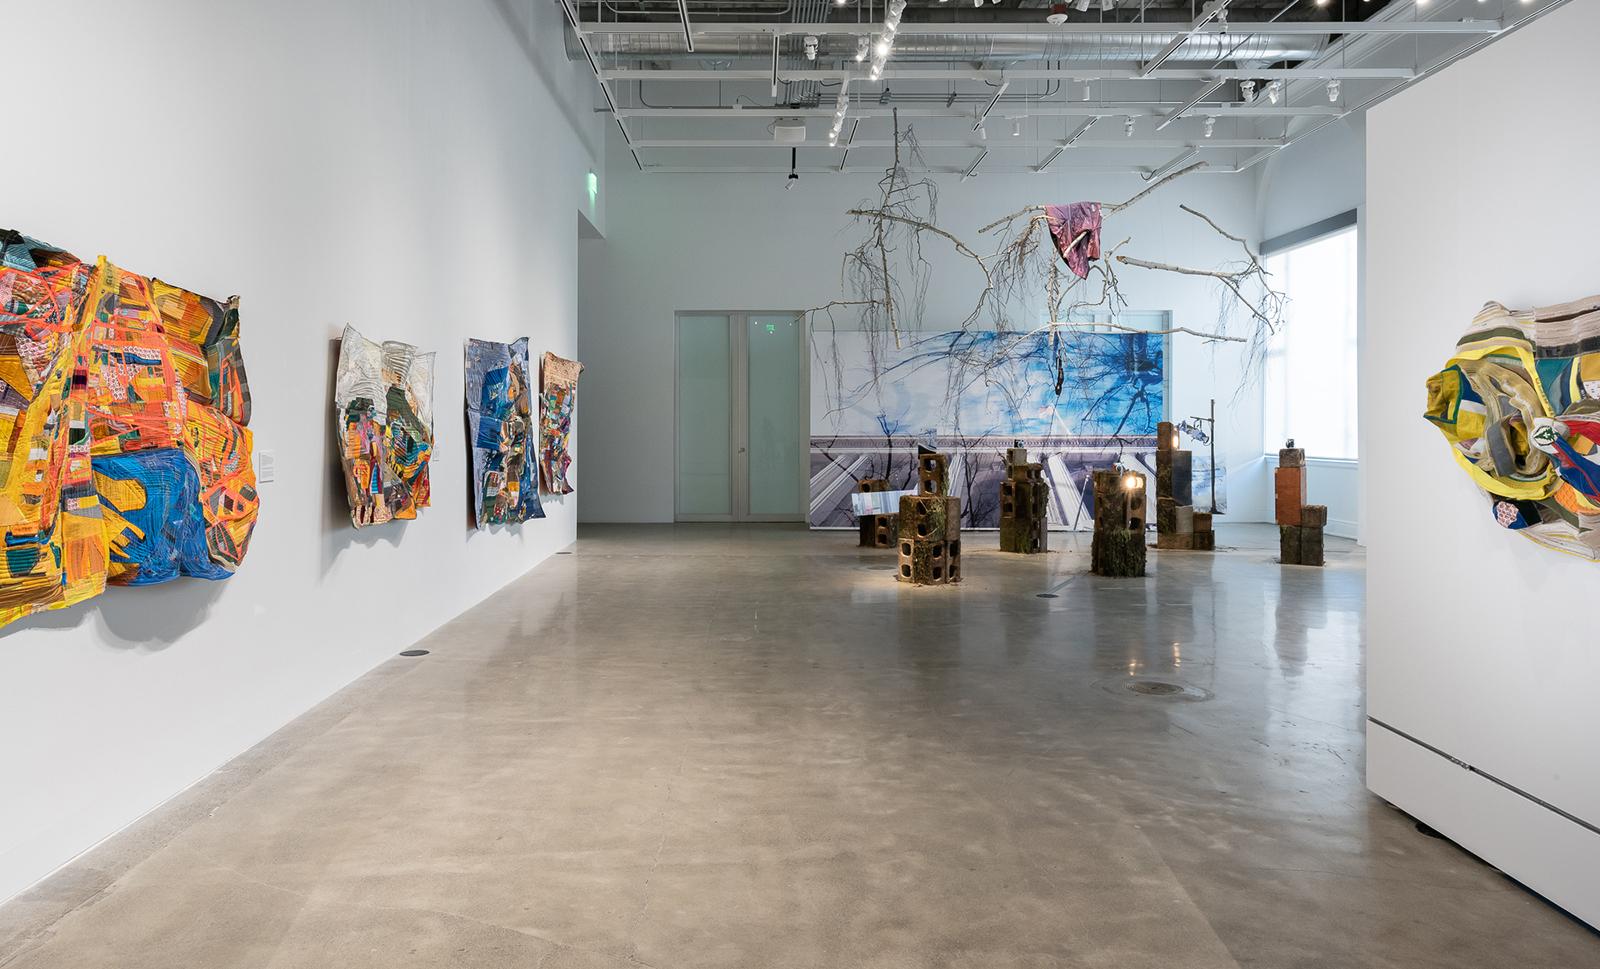 A view of Taking Place from the entrance of the gallery. On the left wall, are textile works by Mansur Nurullah. At the back is an installation by Hannah Waiters.